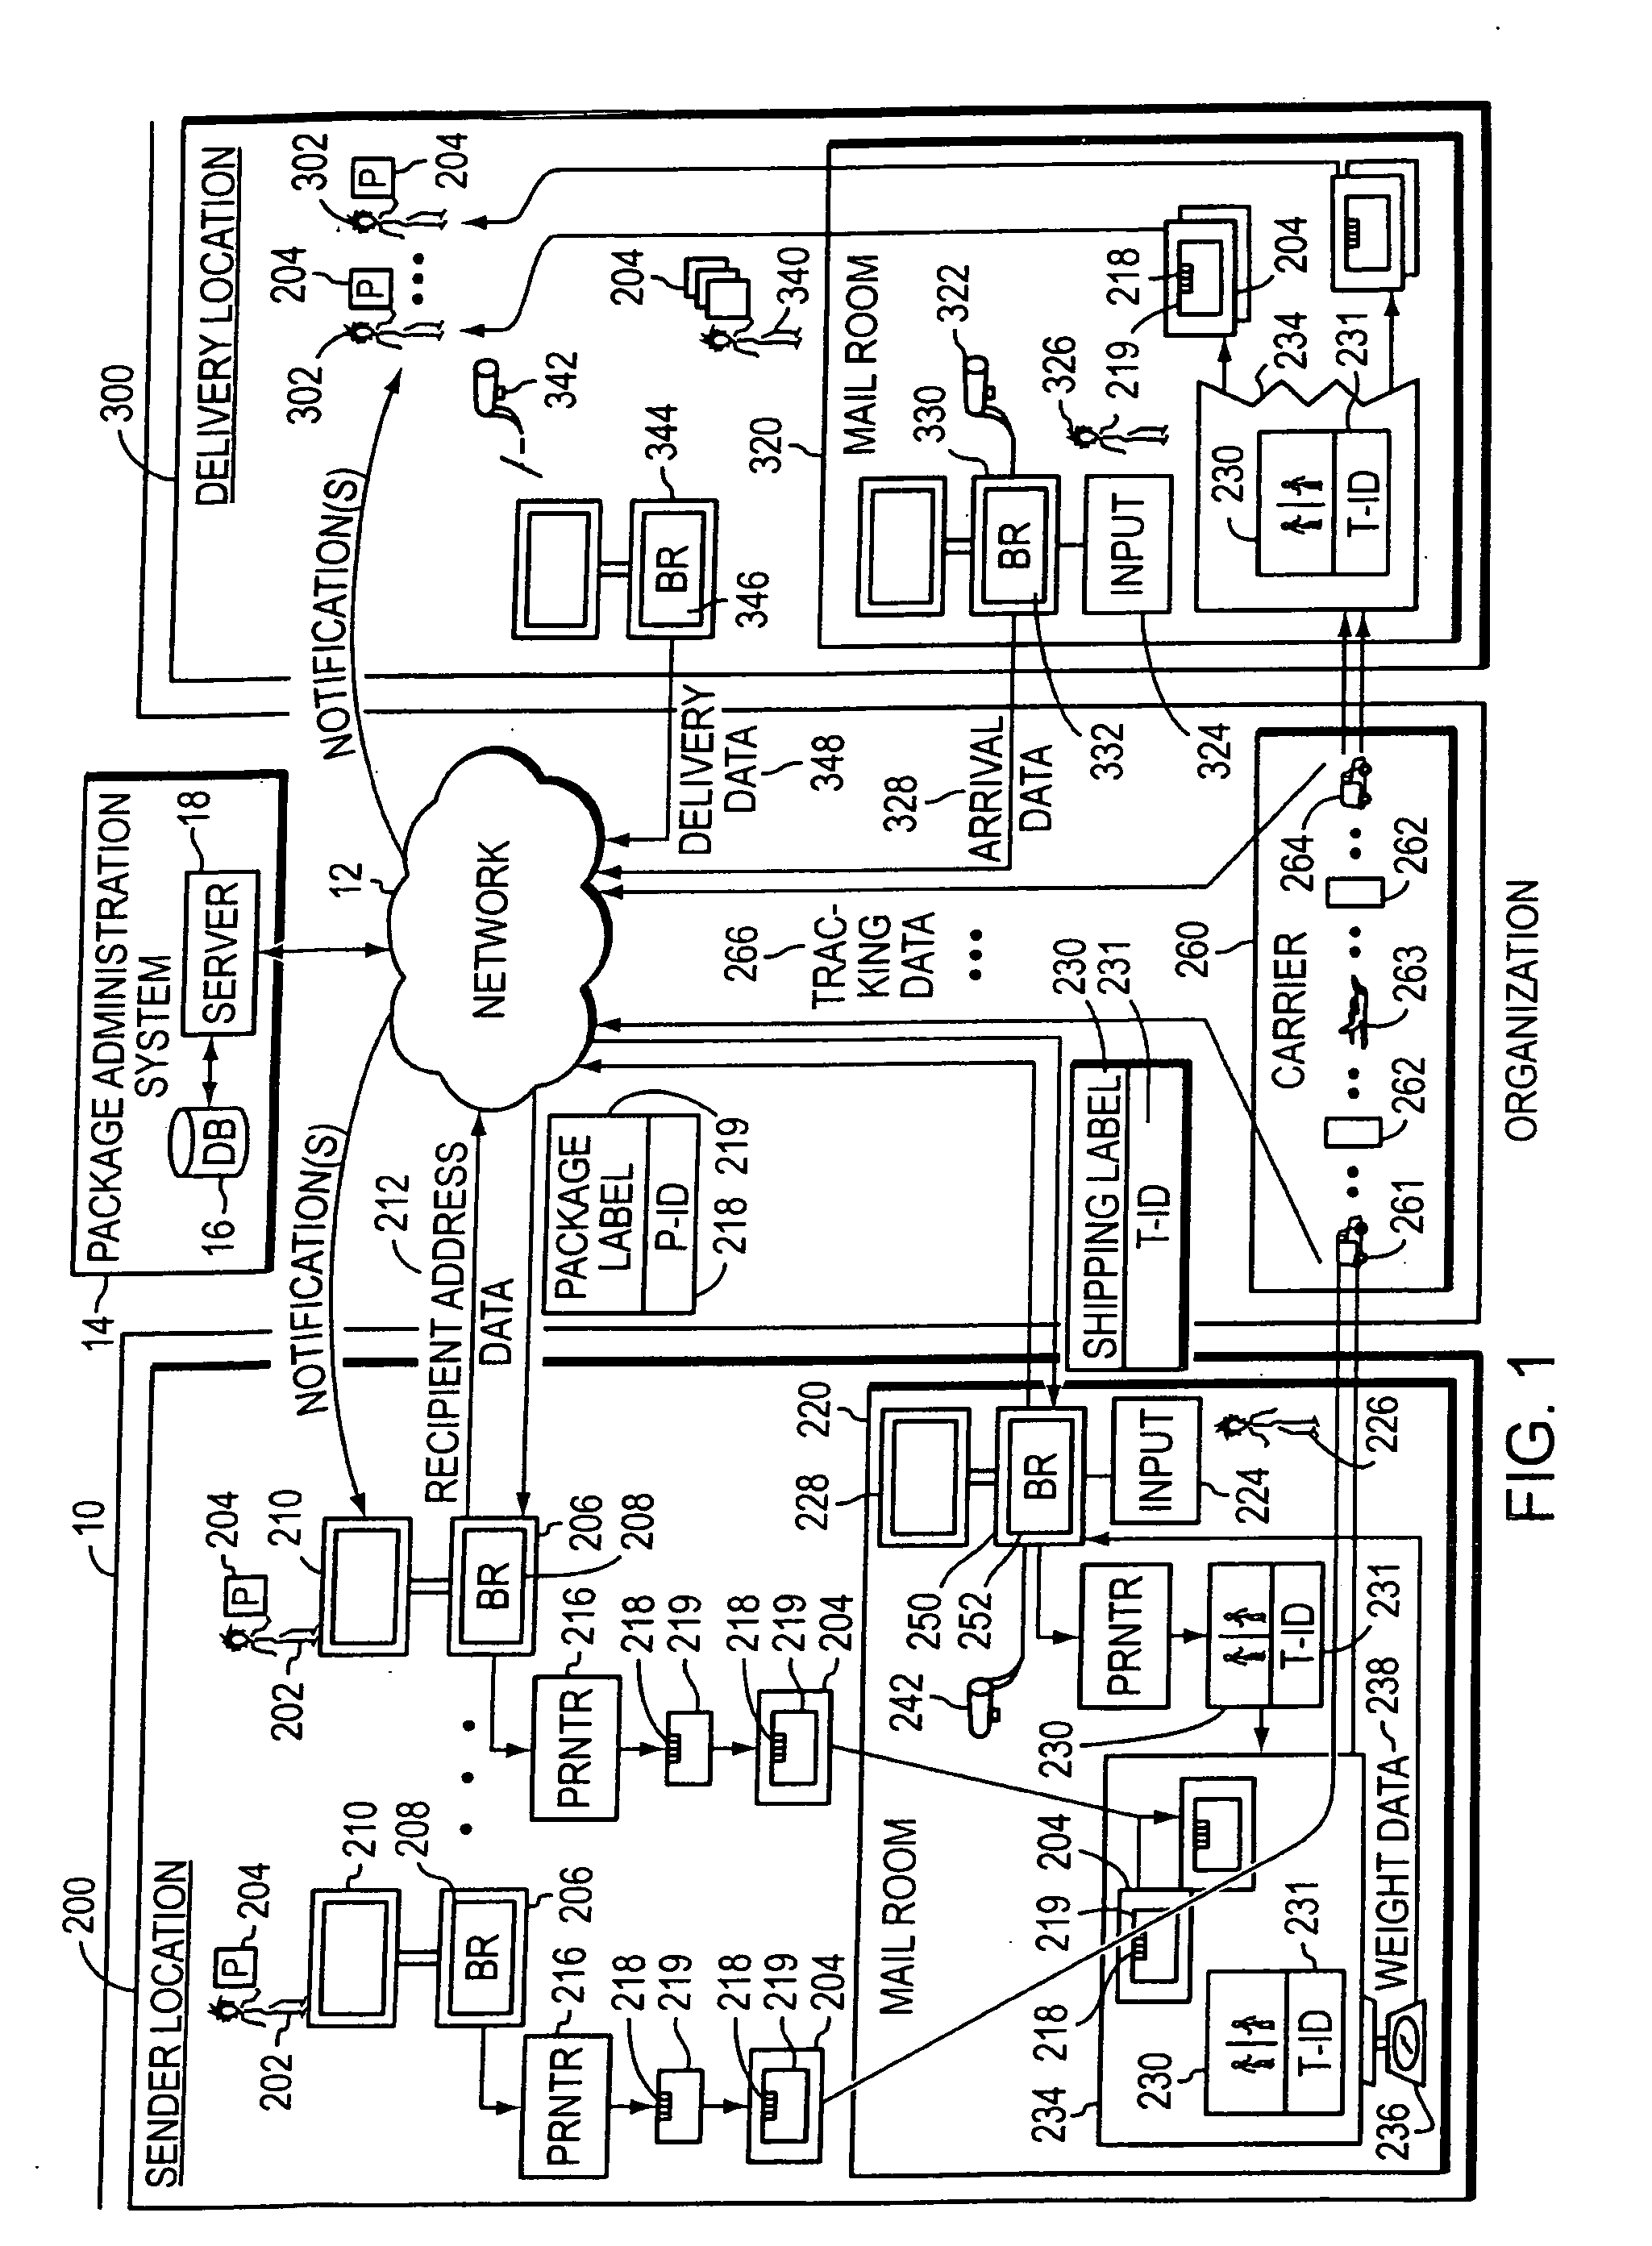 Mail sorting systems and methods